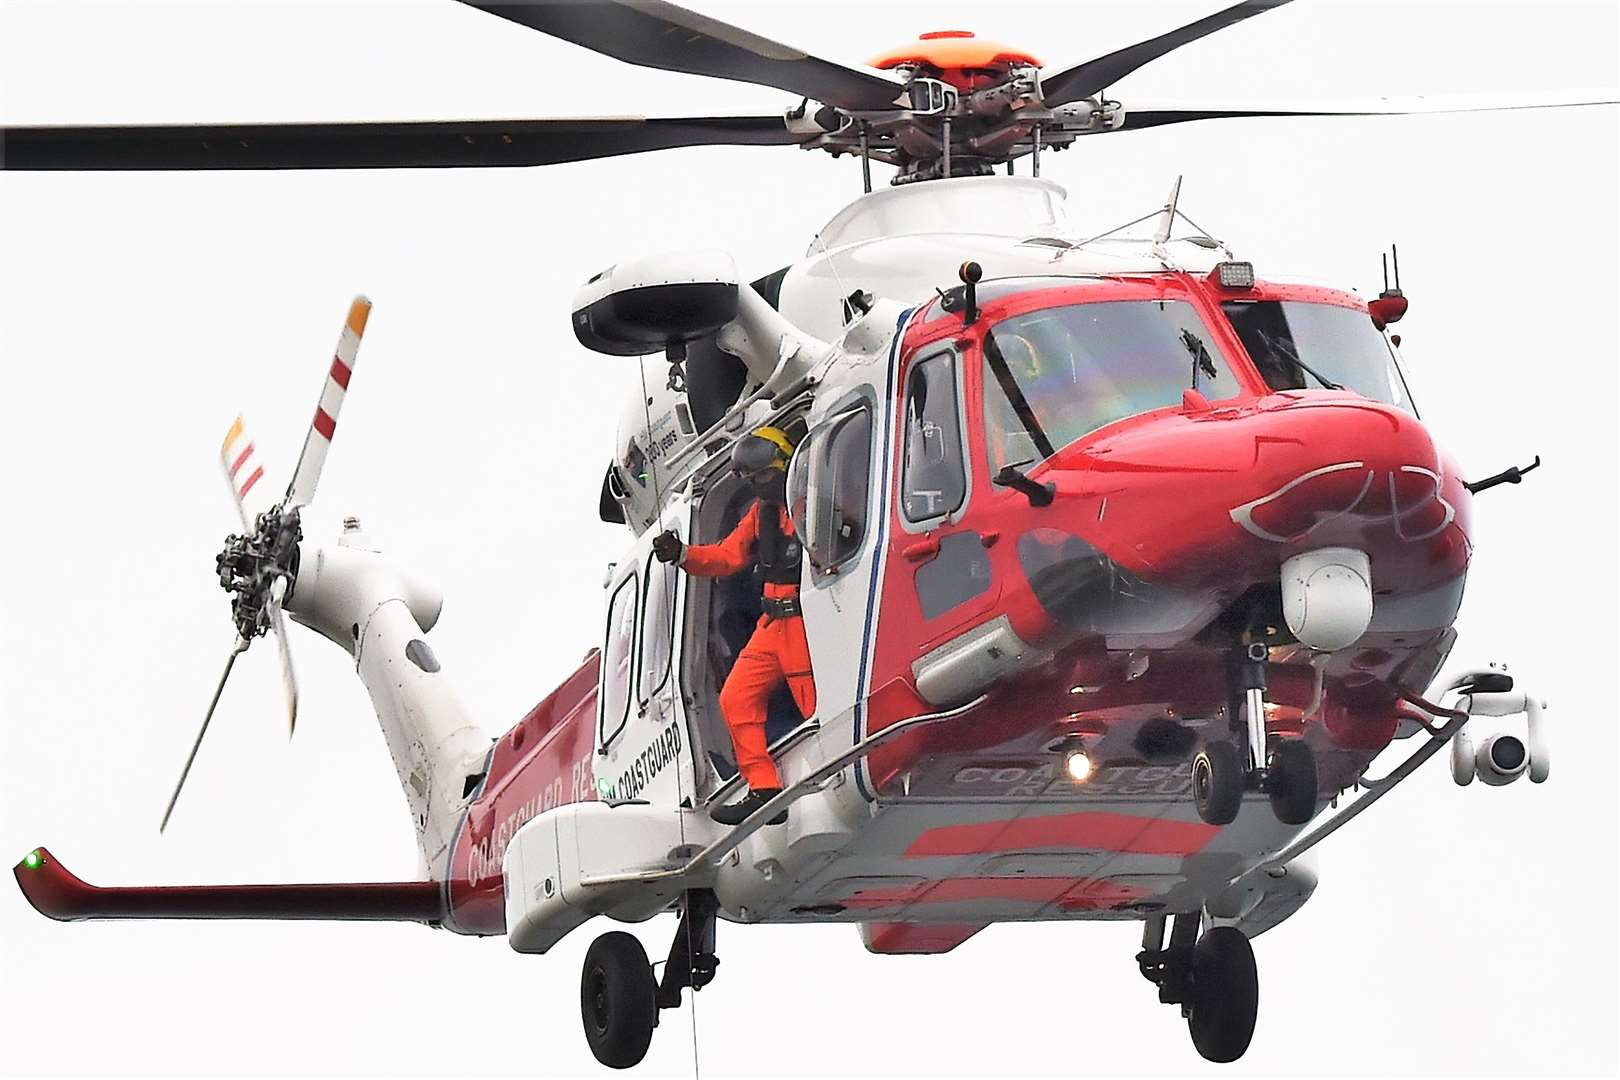 HM Coastguard search and rescue helicopter.